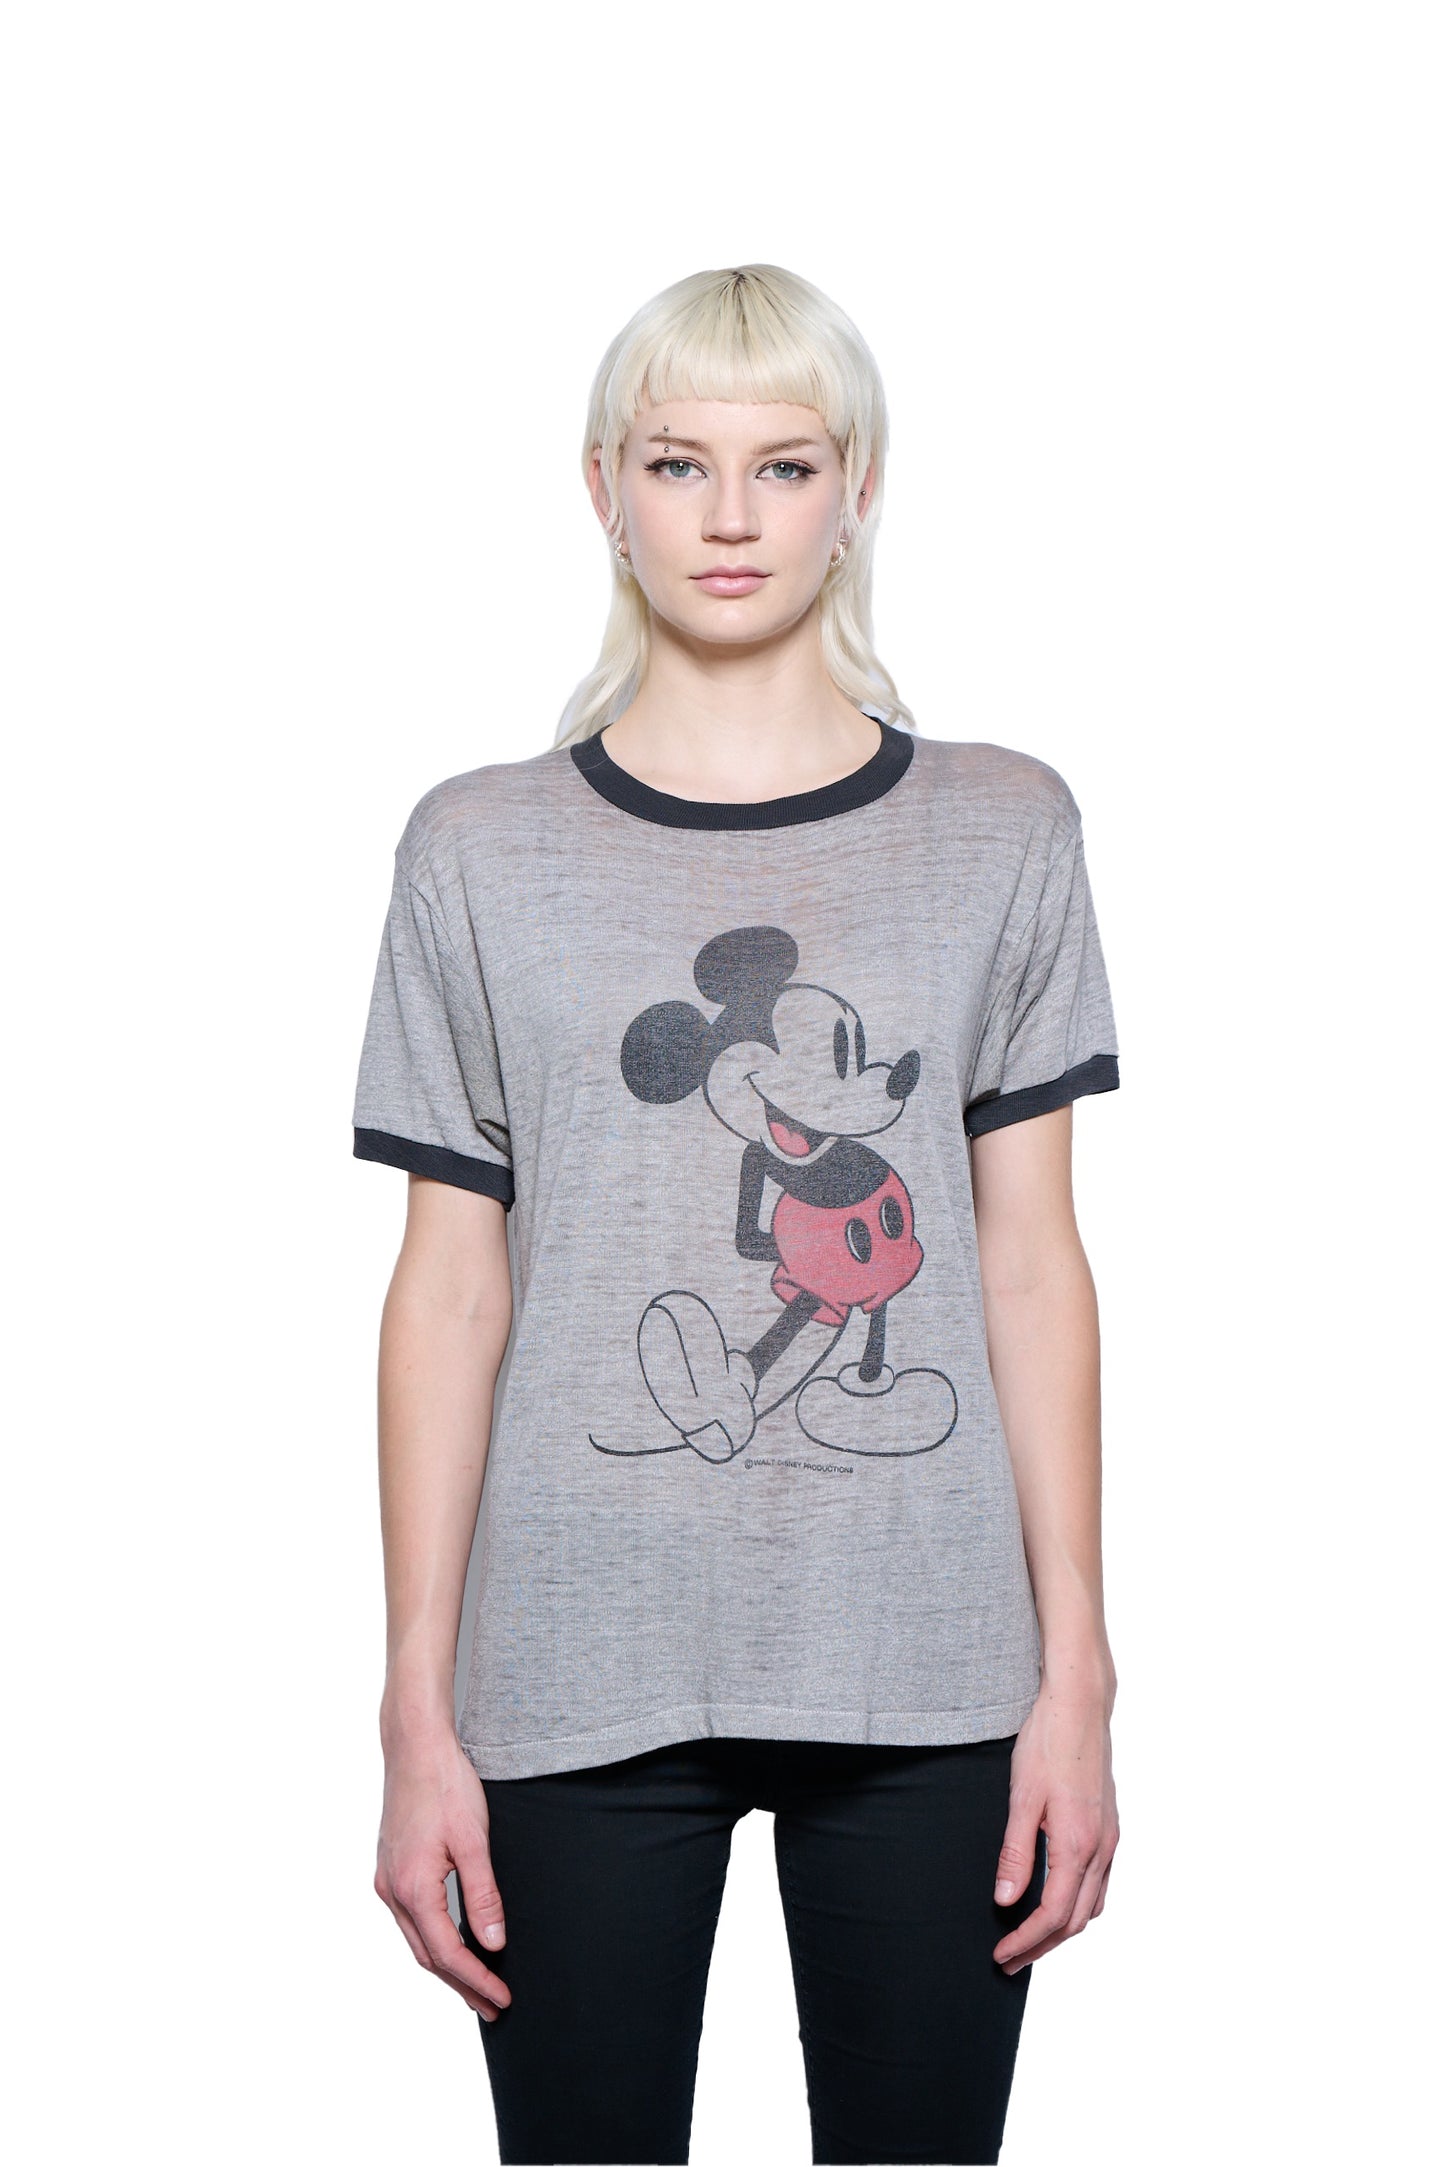 VIntage 1980's Mickey Mouse Ringer T-Shirt